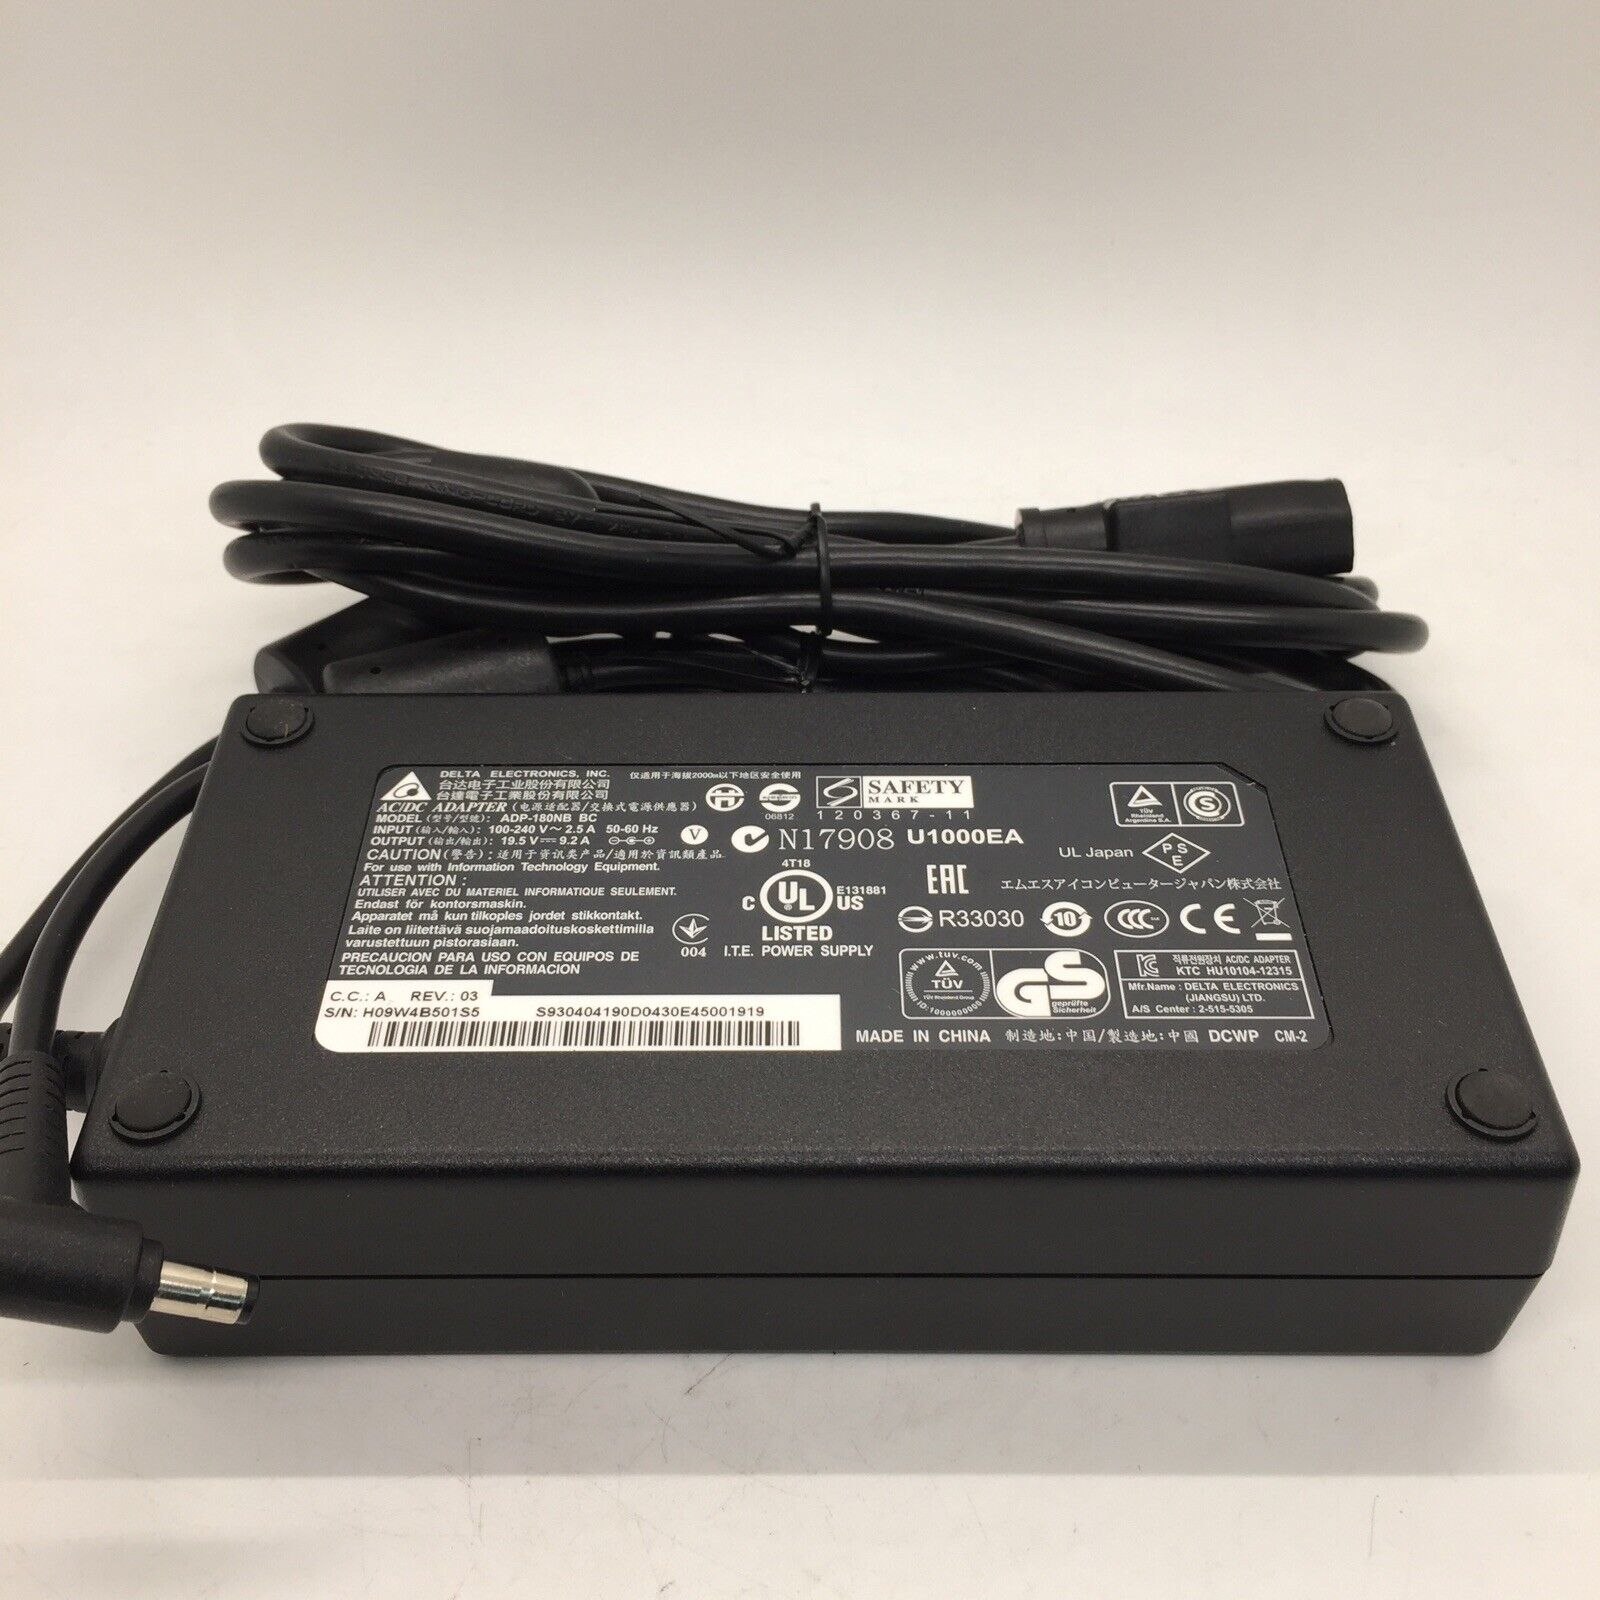 Delta for MSI Laptop Charger AC Adapter Power Suply ADP-180NB BC 19.5V 9.2A 180W